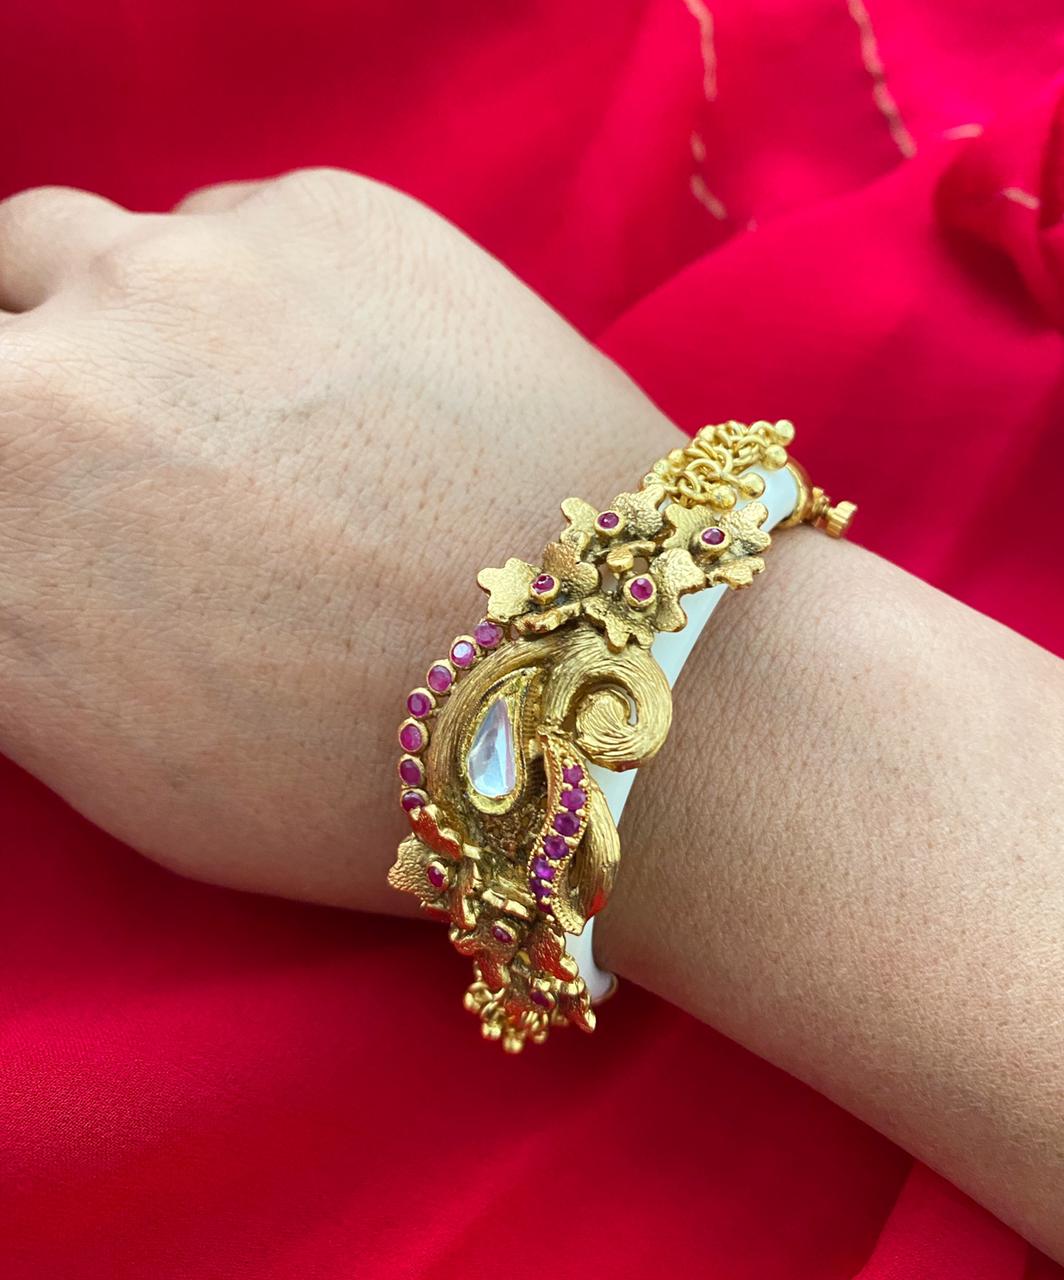 24K Crown Cuff Gold Color Tanishq Antique Gold Bangles Bracelet Fashionable  And Open For Women And Men Copper Big Ring Jewelry Gift 20211223 T2 Dro  DH3VY From Yy_dhhome, $3.64 | DHgate.Com